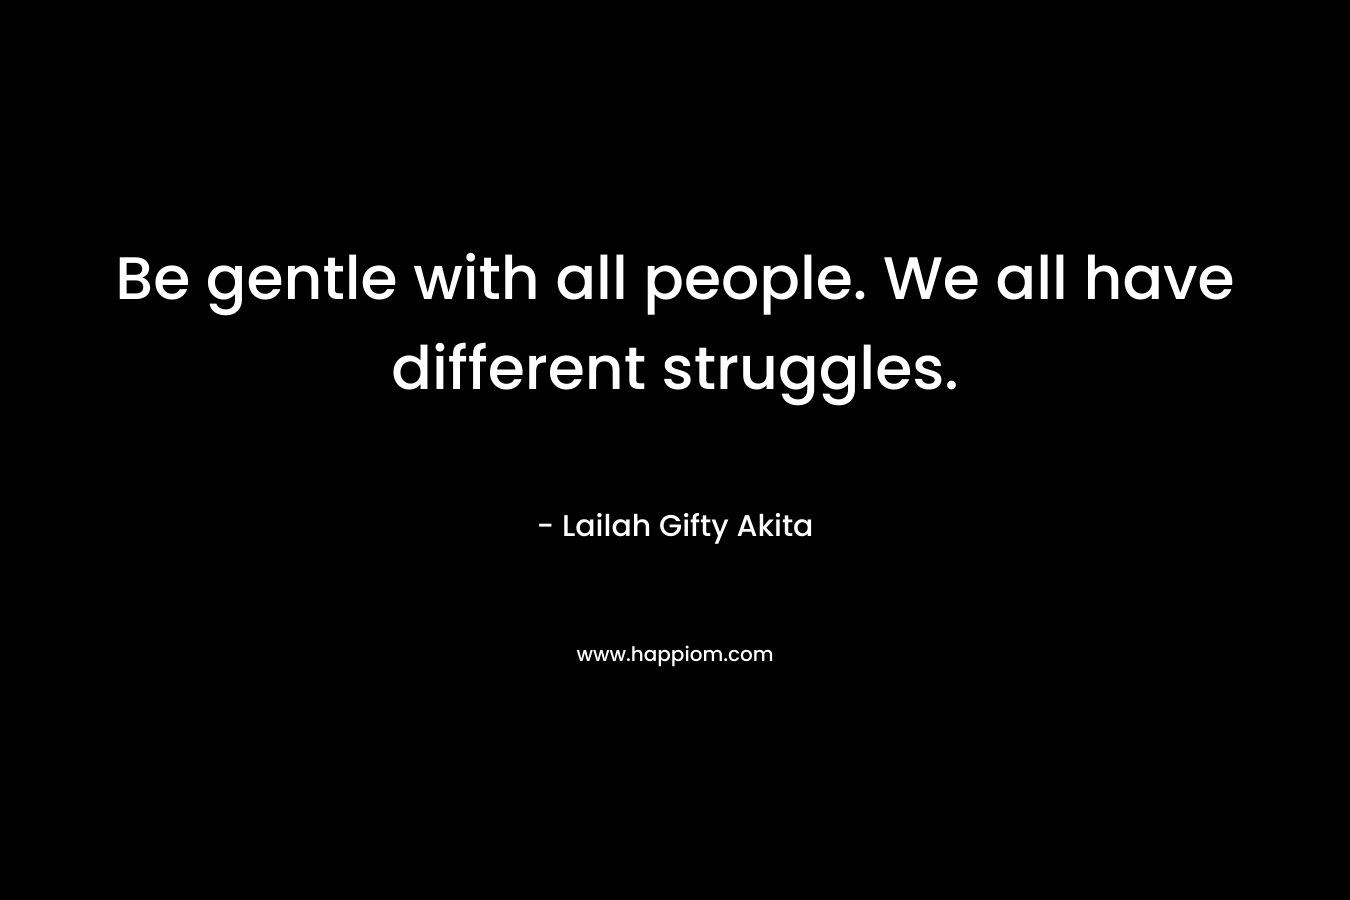 Be gentle with all people. We all have different struggles.